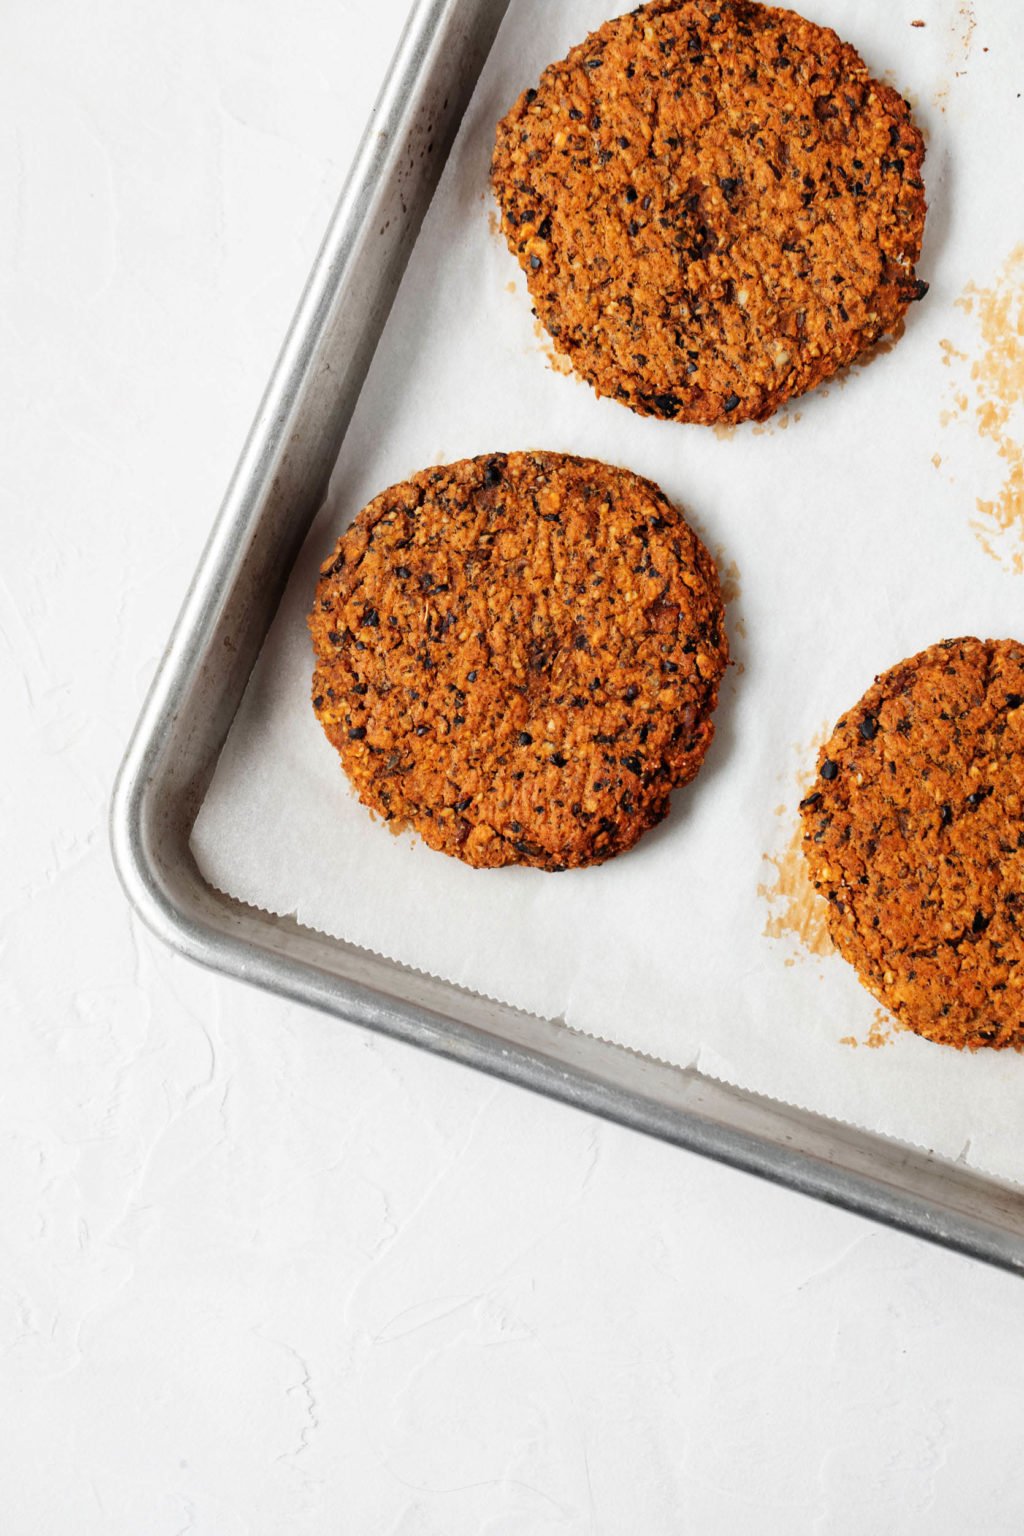 Black bean sweet potato burgers are arranged on a parchment lined baking sheet. 